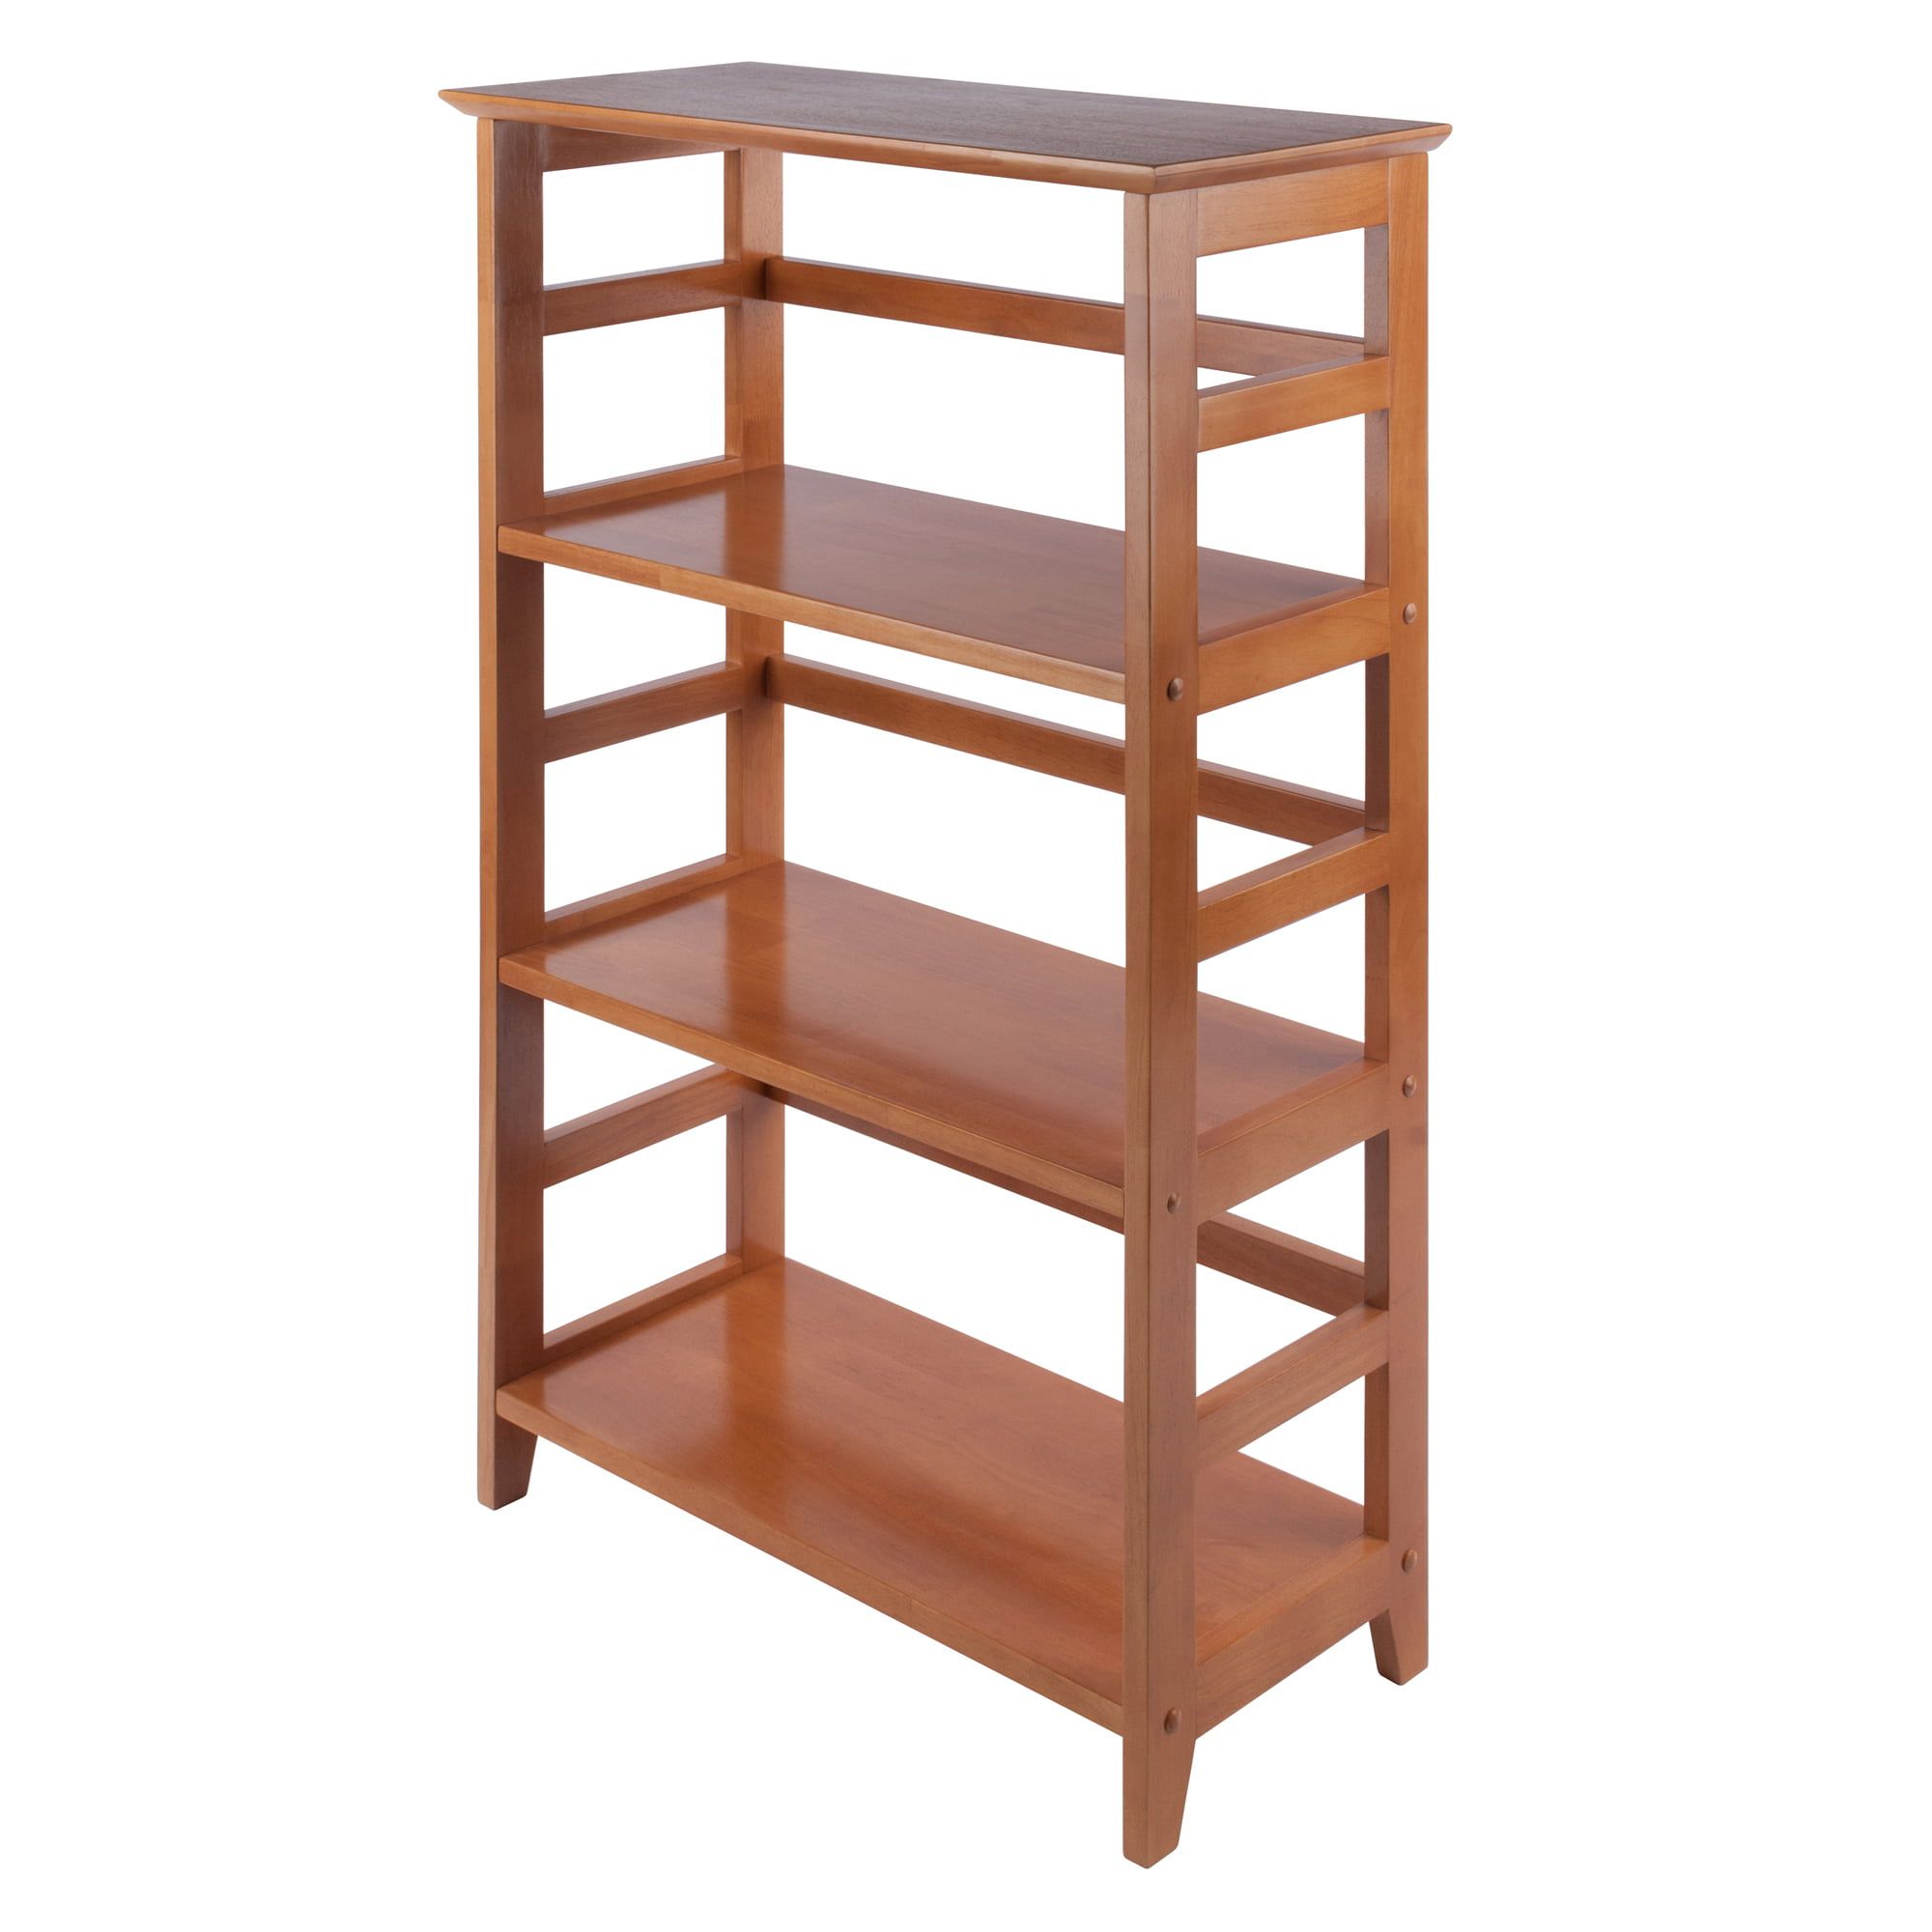 Winsome Wood Studio 3 Section Bookshelf, Honey Pine Finish – Walmart Intended For Nut Brown Finish Bookcases (View 15 of 15)